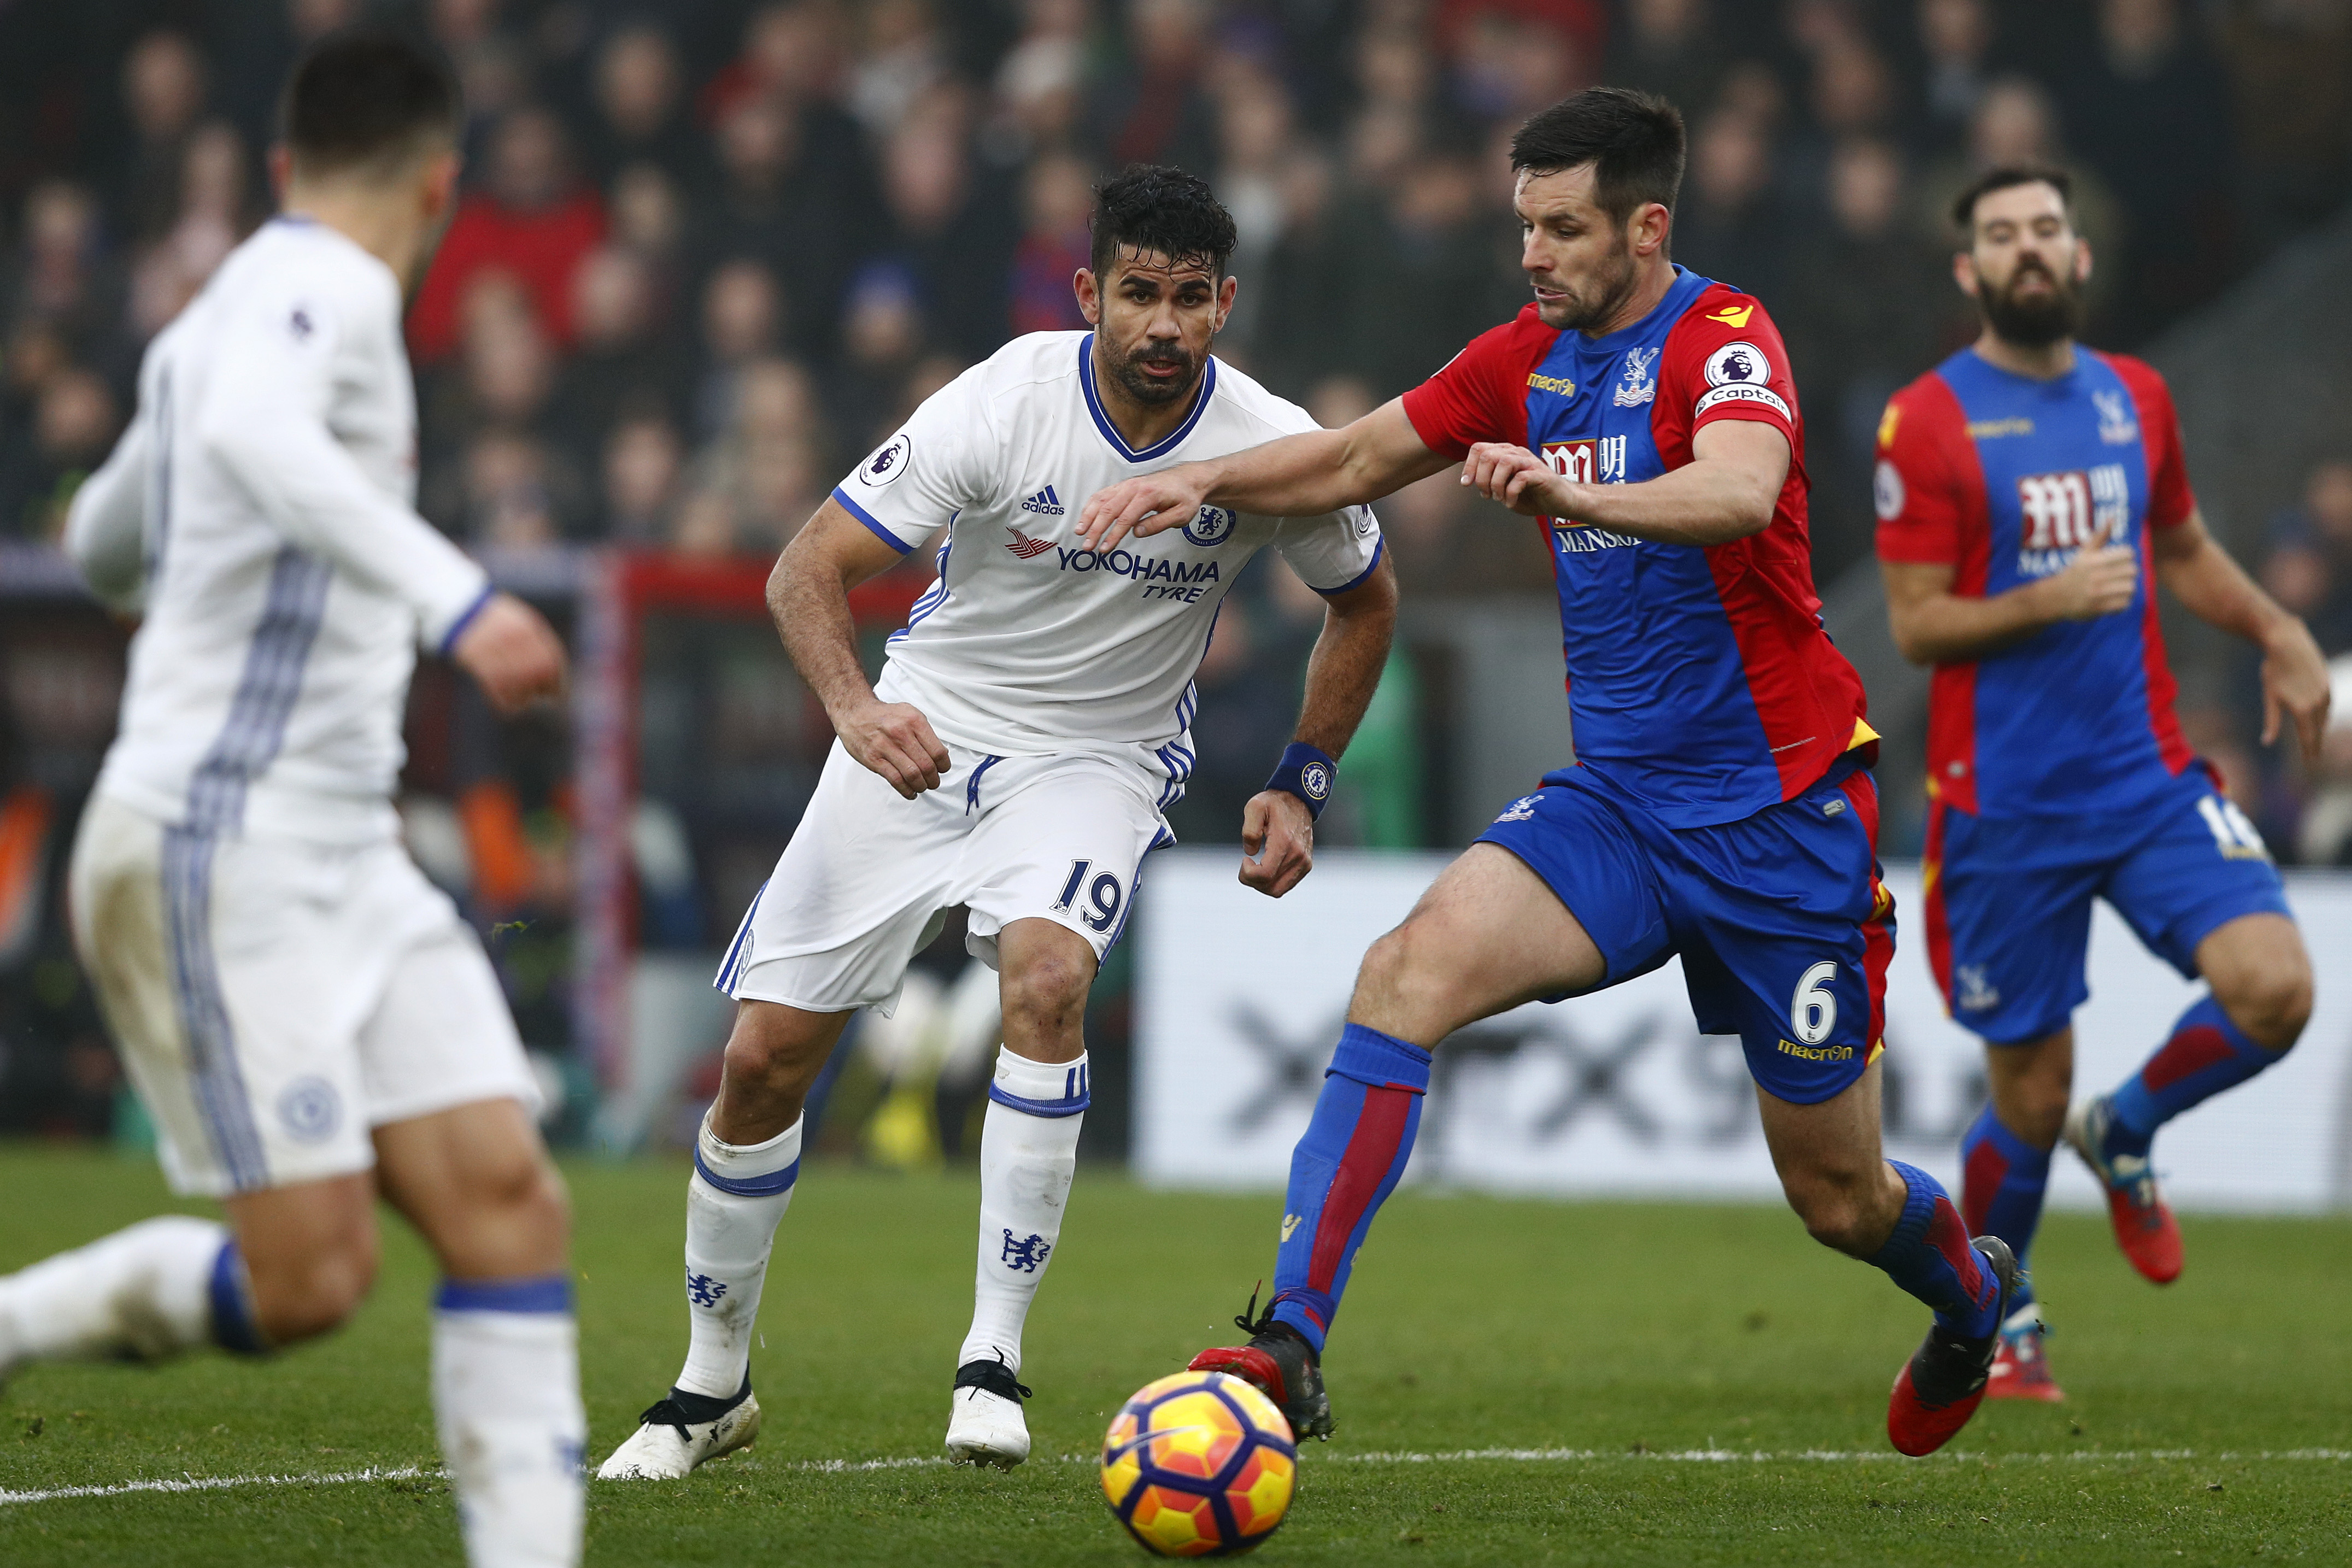 Chelsea's Brazilian-born Spanish striker Diego Costa (C) vies with Crystal Palace's English defender Scott Dann during the English Premier League football match between Crystal Palace and Chelsea at Selhurst Park in south London on December 17, 2016. / AFP / Adrian DENNIS / RESTRICTED TO EDITORIAL USE. No use with unauthorized audio, video, data, fixture lists, club/league logos or 'live' services. Online in-match use limited to 75 images, no video emulation. No use in betting, games or single club/league/player publications.  /         (Photo credit should read ADRIAN DENNIS/AFP/Getty Images)